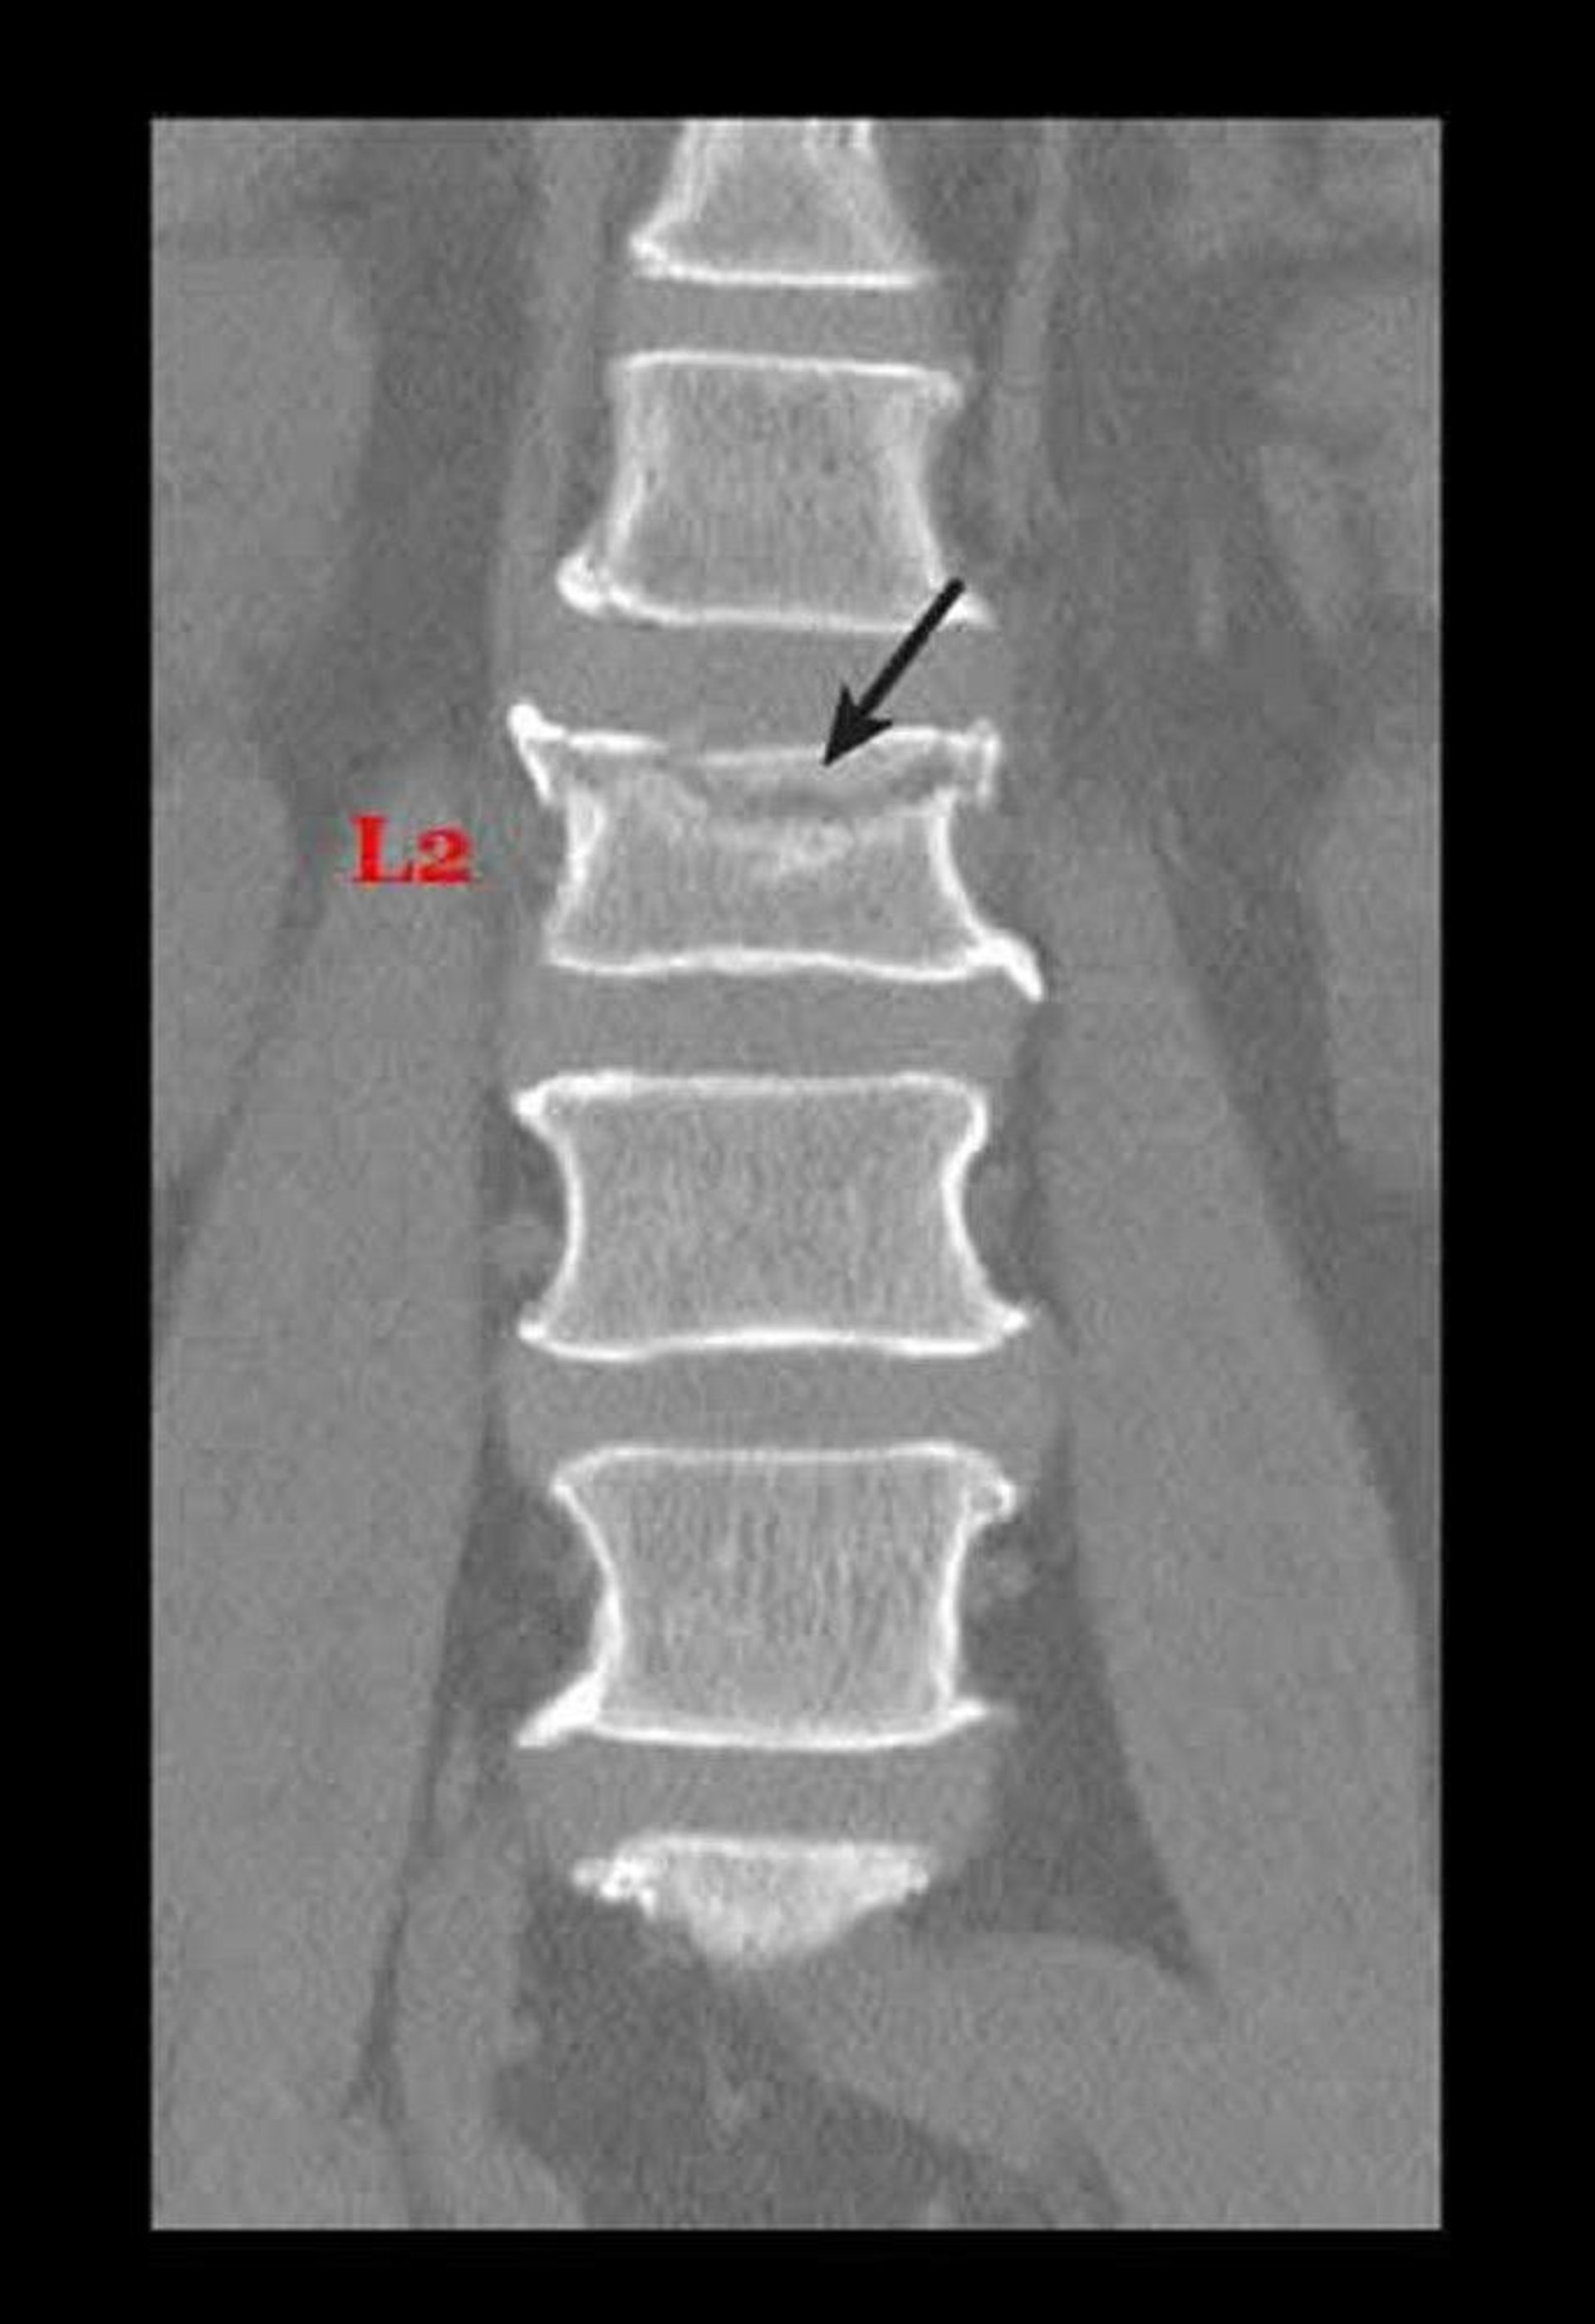 Compression Fracture Due to Osteoporosis